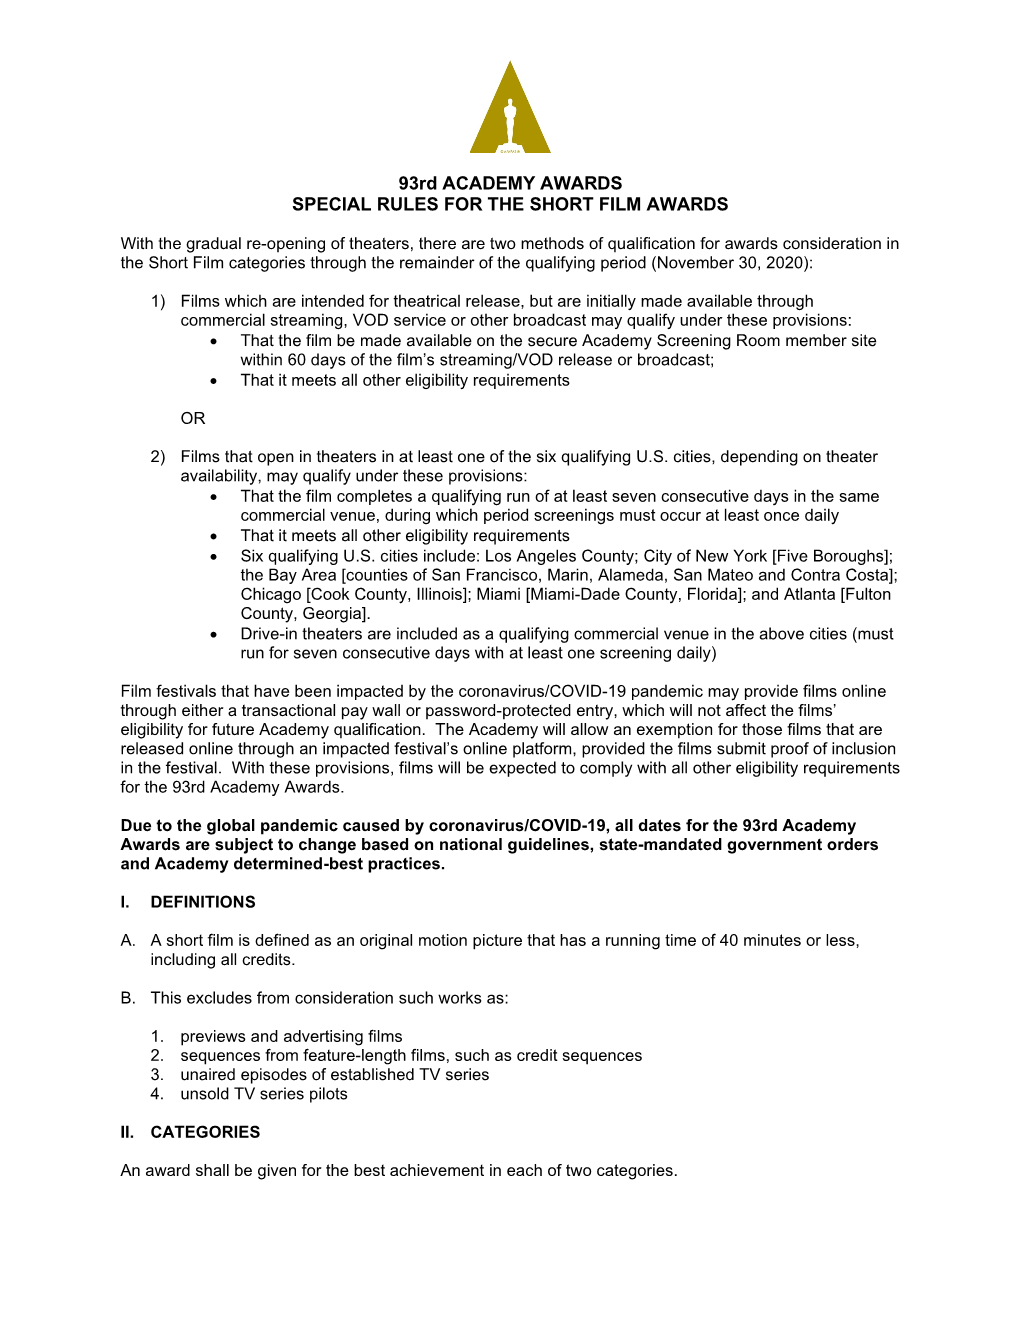 93Rd ACADEMY AWARDS SPECIAL RULES for the SHORT FILM AWARDS